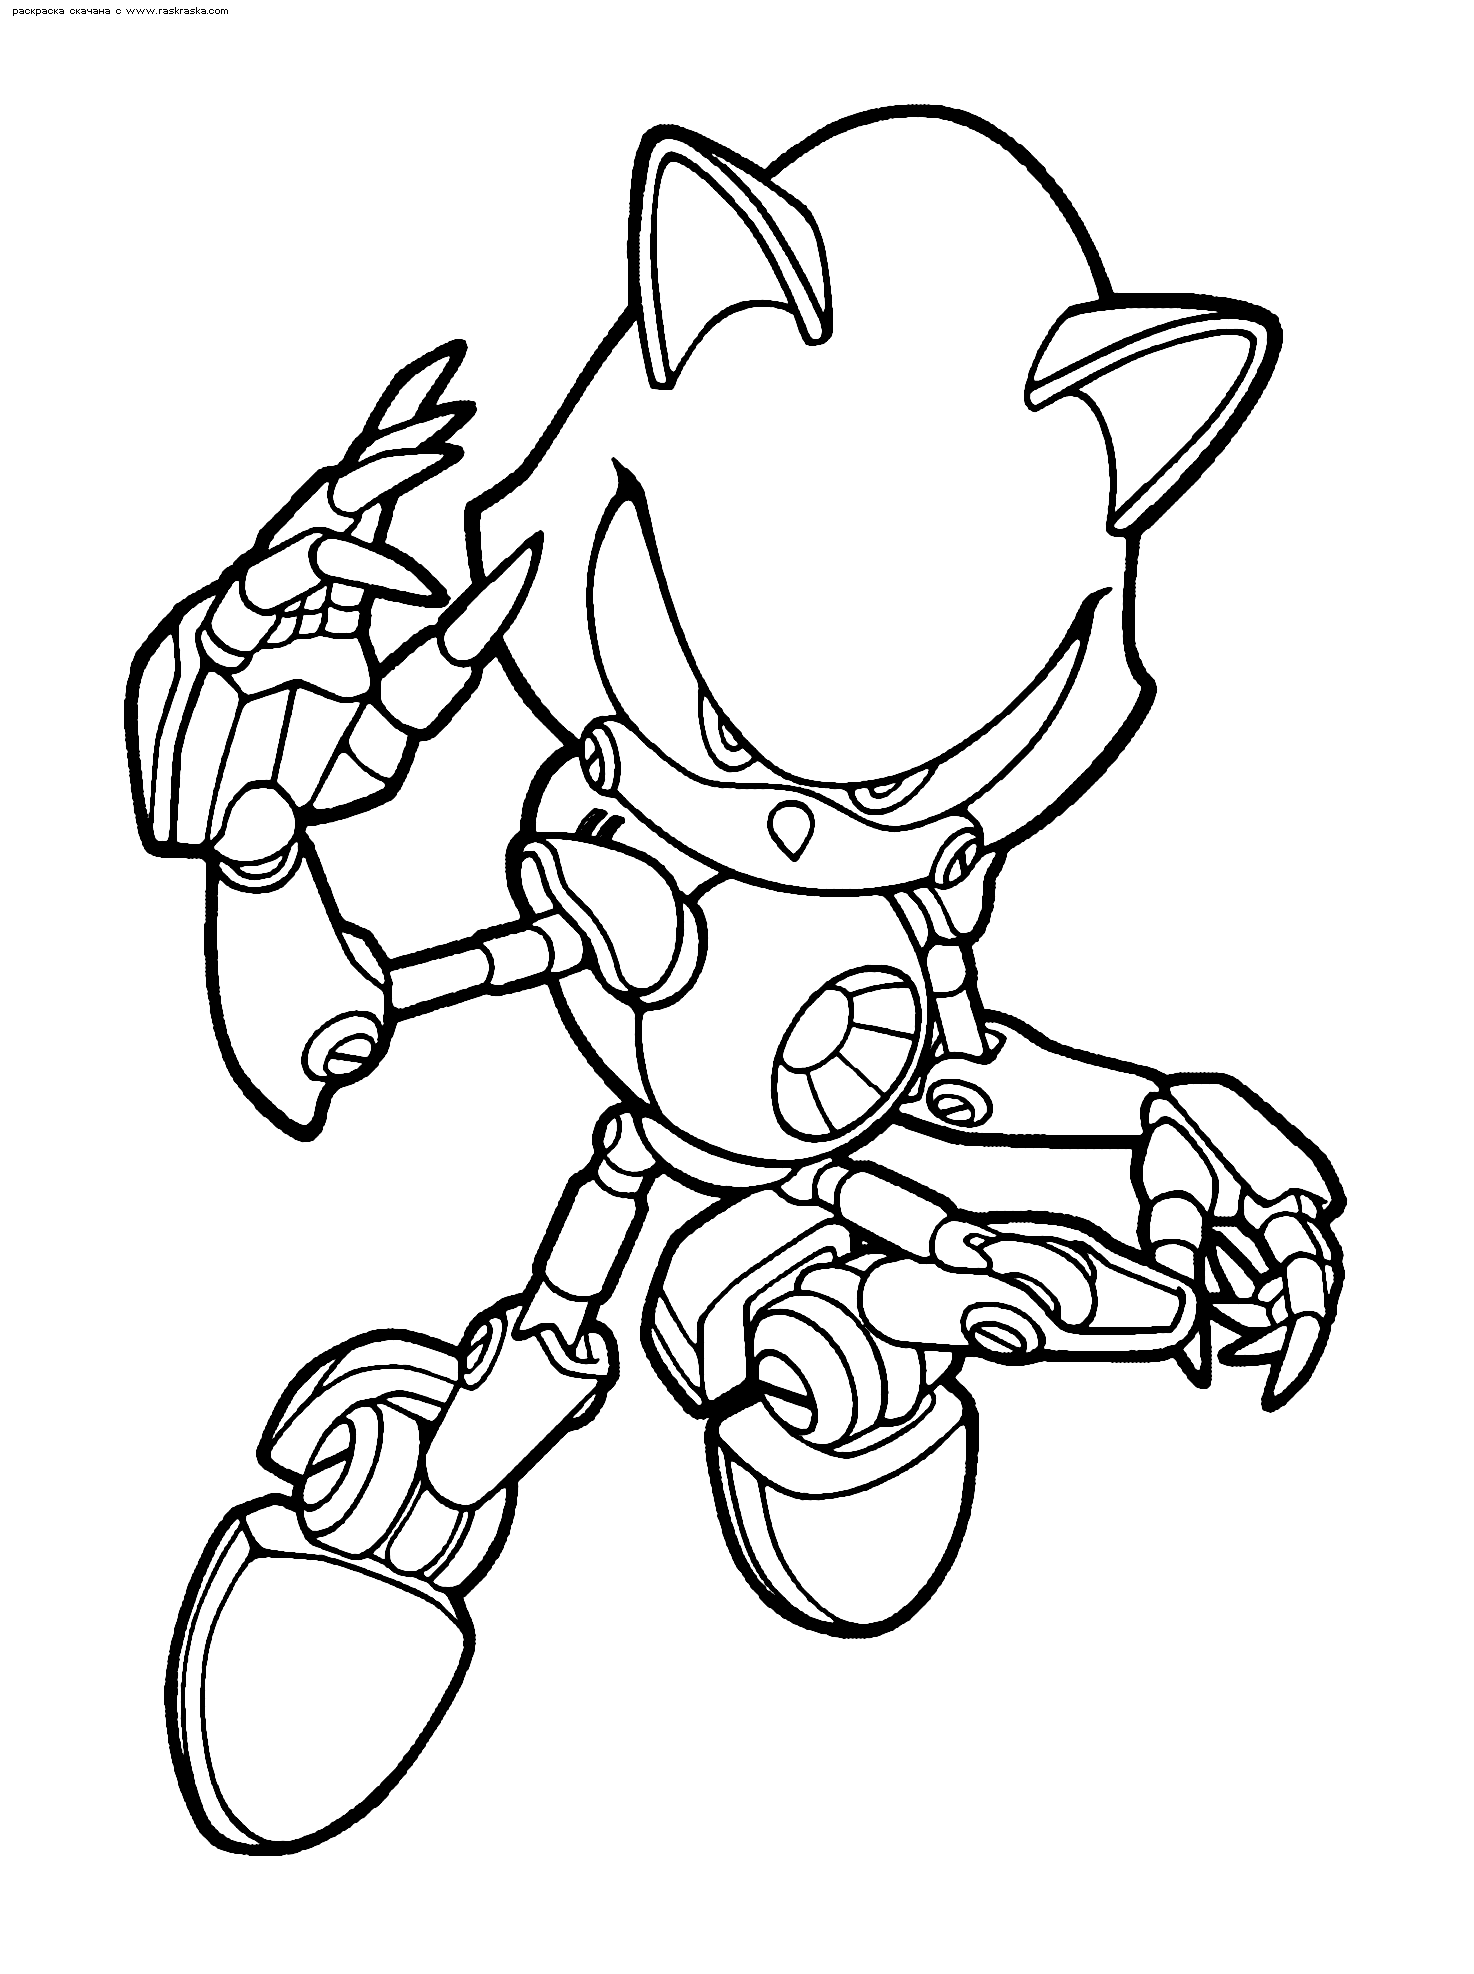 sonic printable coloring pages sonic the hedgehog coloring pages getcoloringpagescom coloring printable sonic pages 